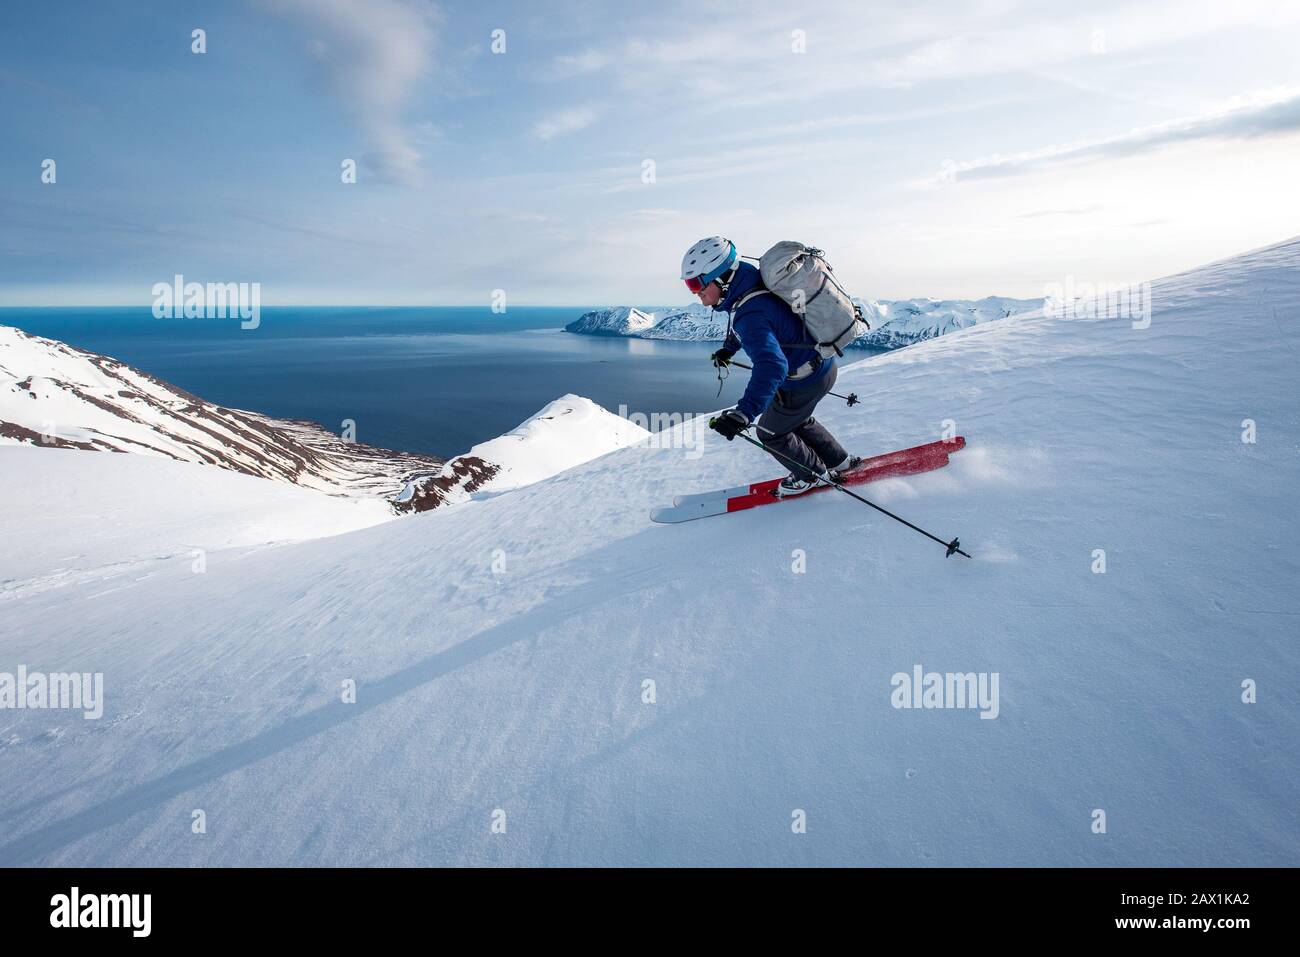 A man skiing downhill with ocean in the background in Iceland Stock Photo